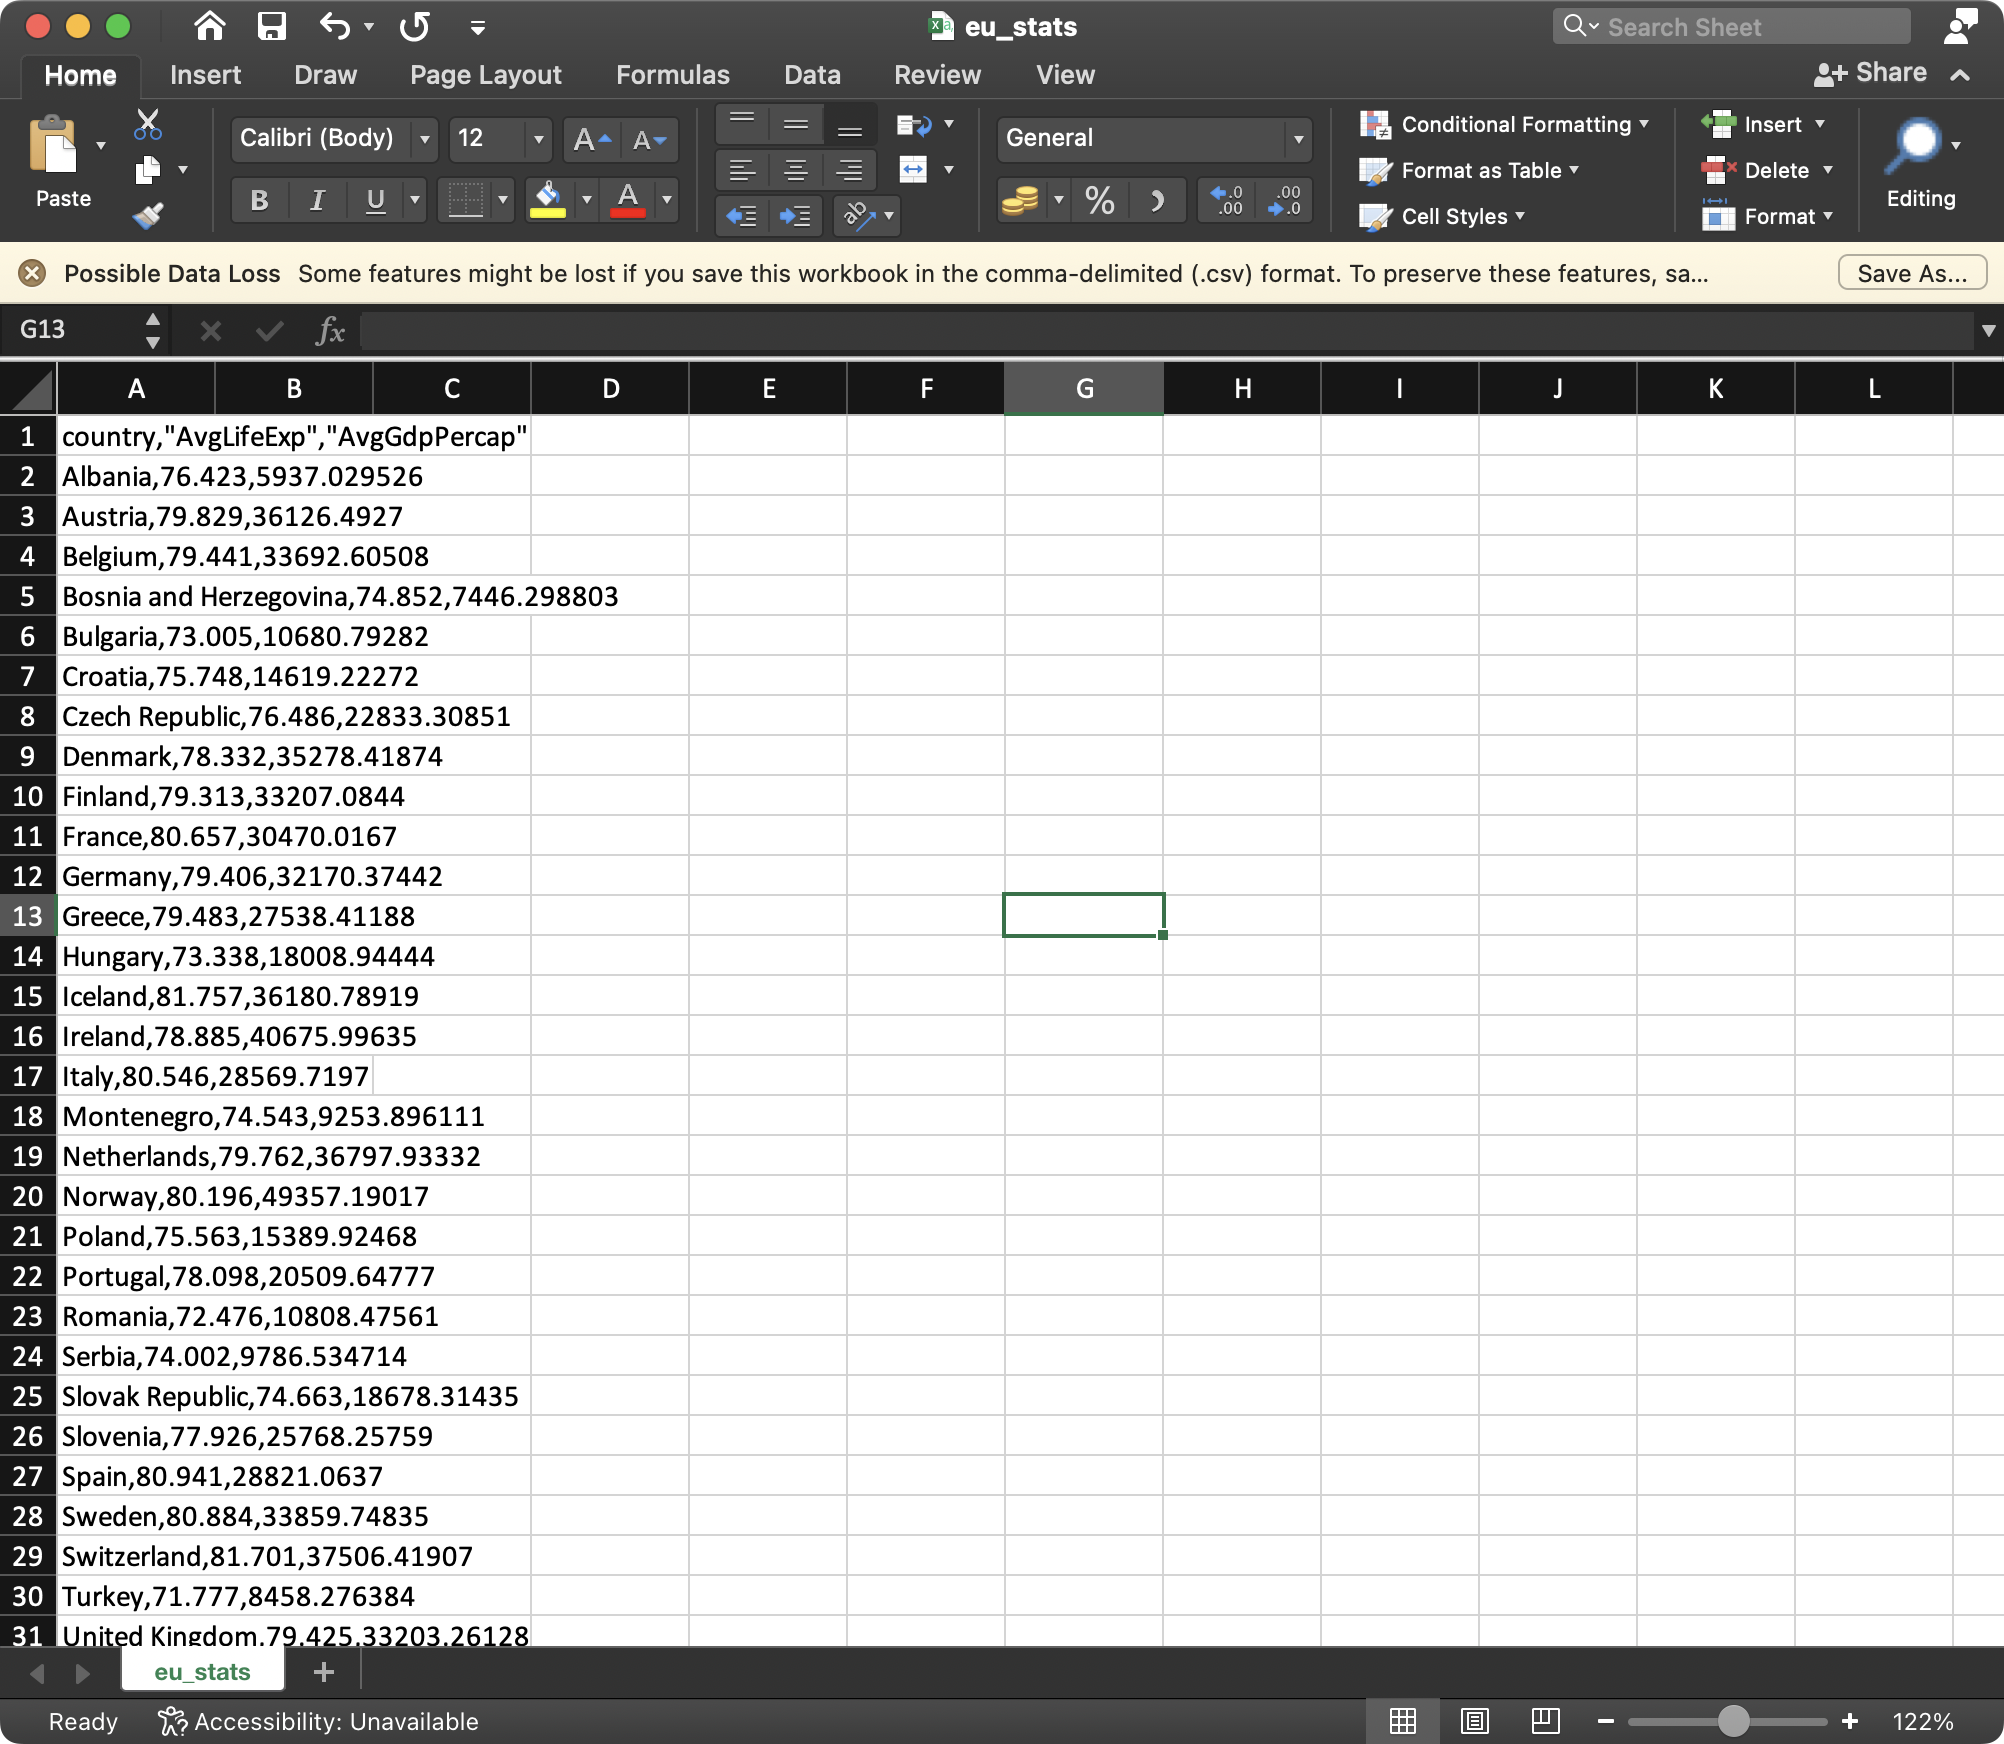  Image 2 - The resulting CSV file